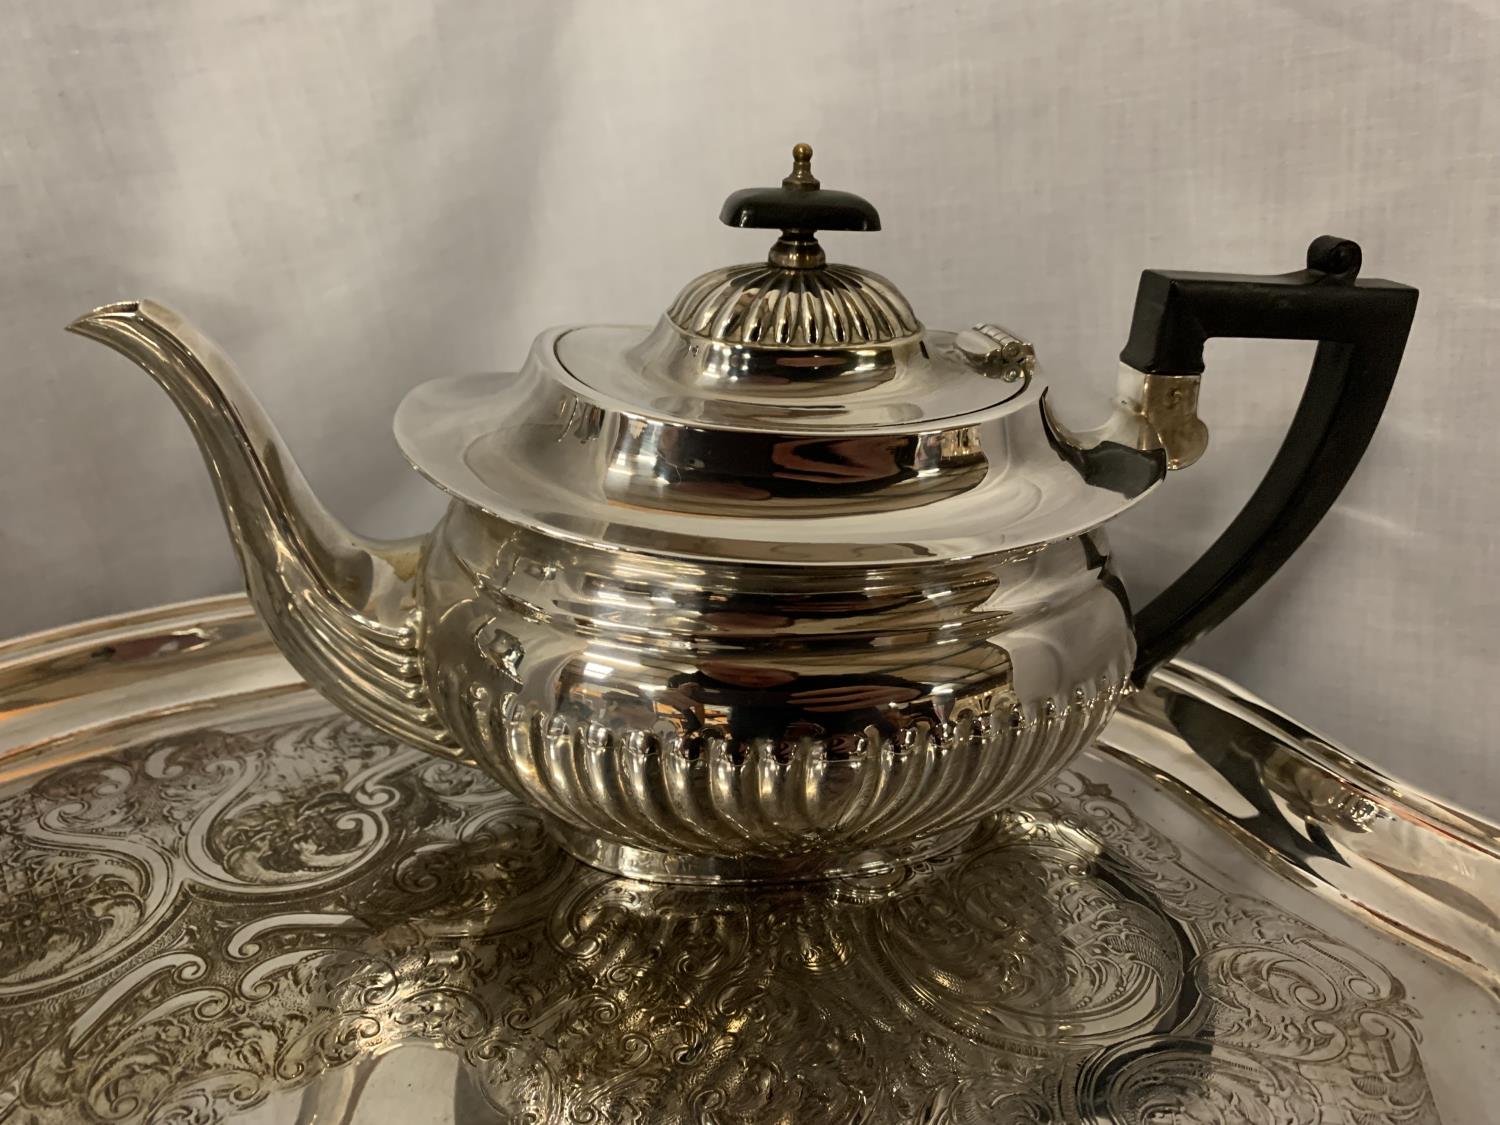 A SILVER PLATED TEAPOT, COFFEE POT, MILK JUG AND SUGAR BOWL ON A TRAY - Image 4 of 6